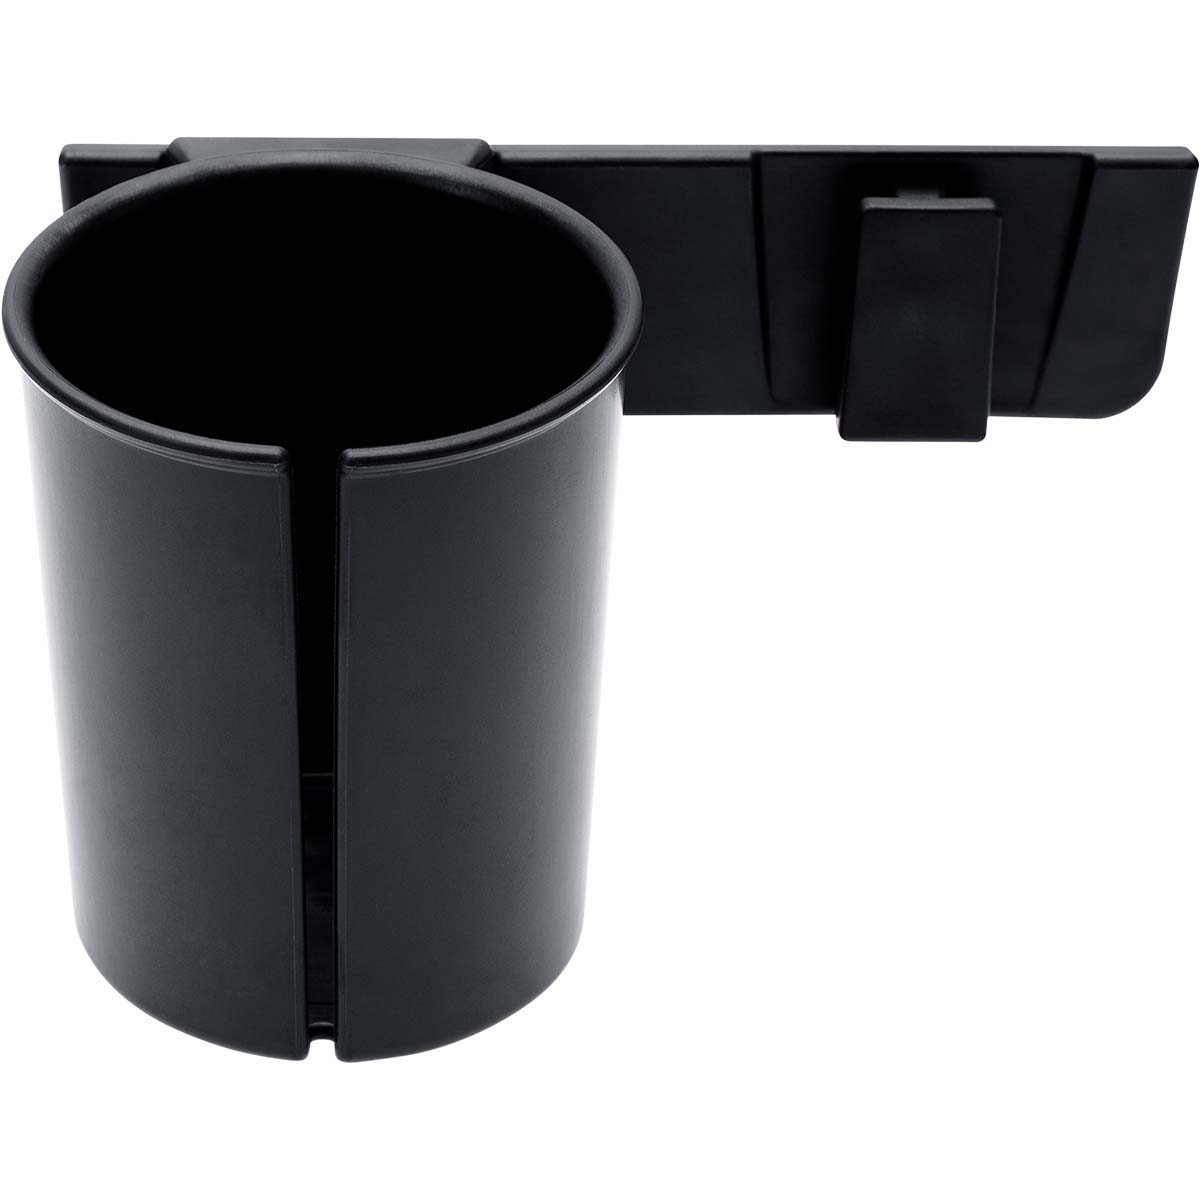 Dometic Cool Ice Cup Holder and Bracket Kit